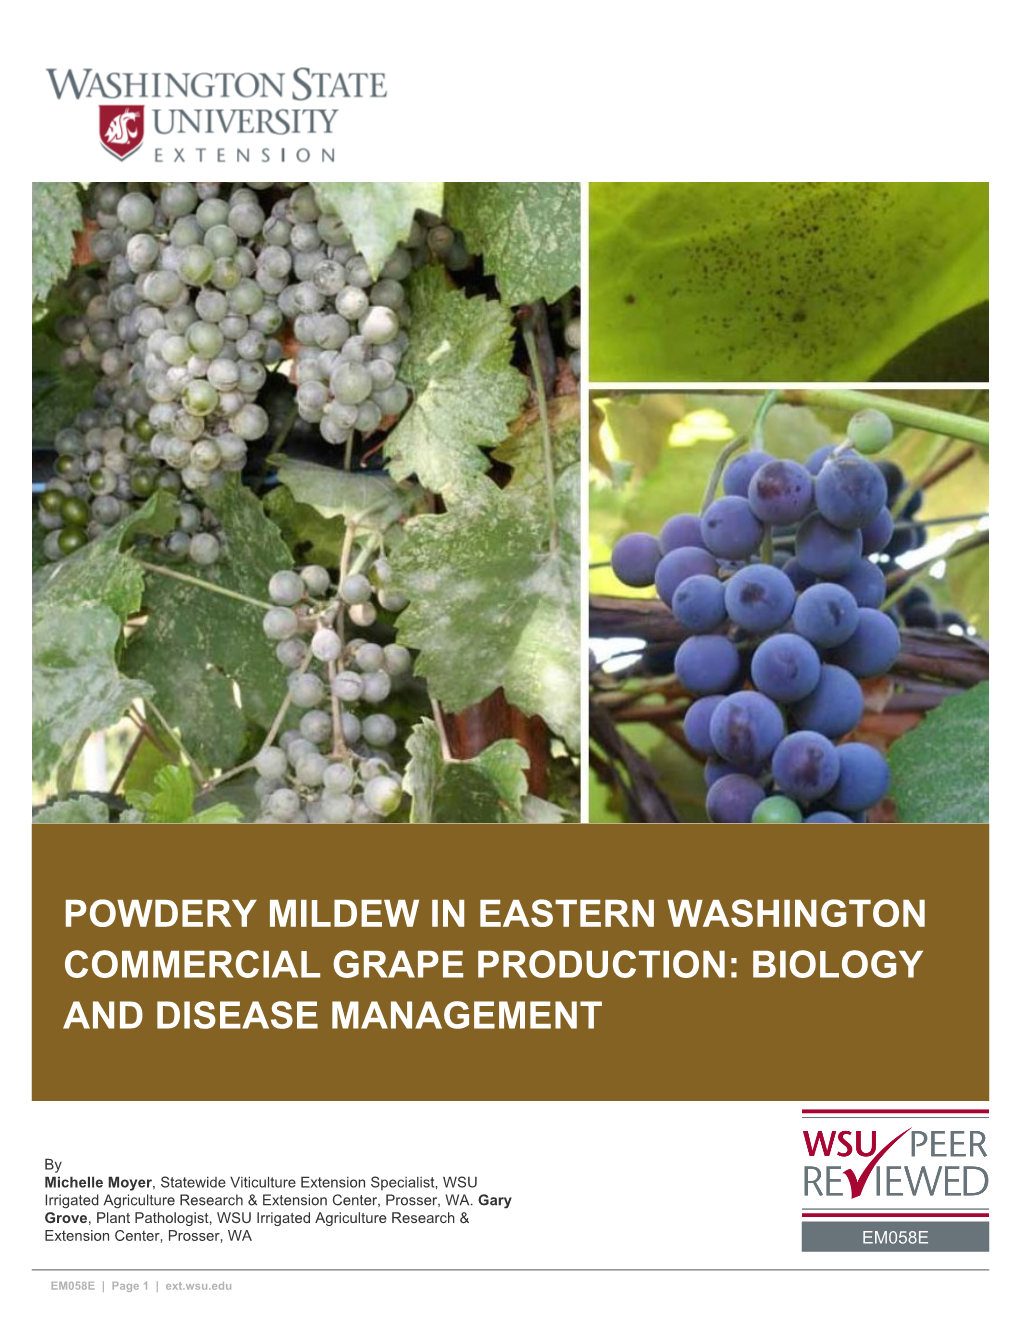 Powdery Mildew in Eastern Washington Commercial Grape Production: Biology and Disease Management